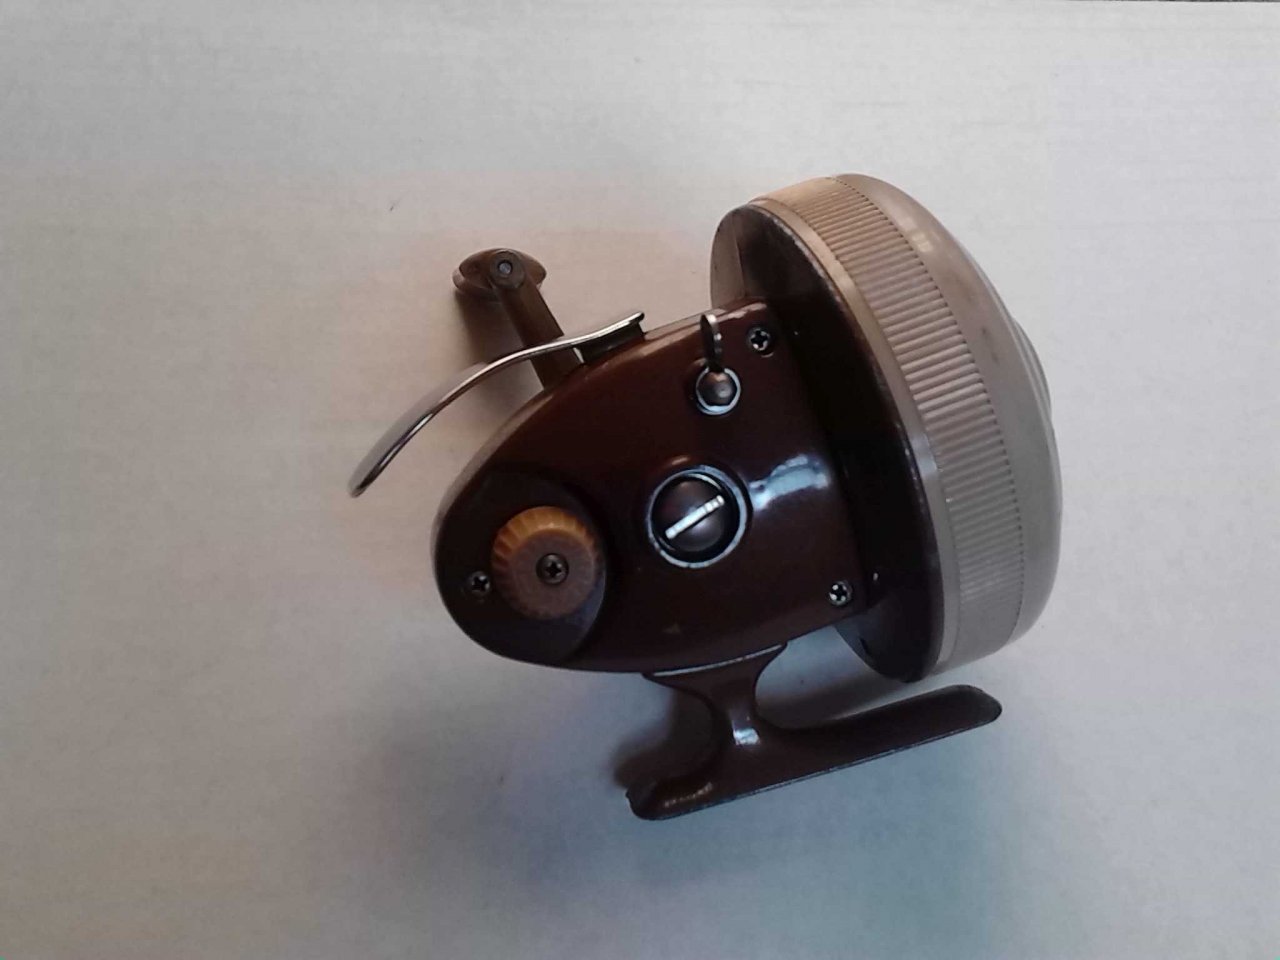 A Look At The Eagle Claw EC-88-B Spincast Reel